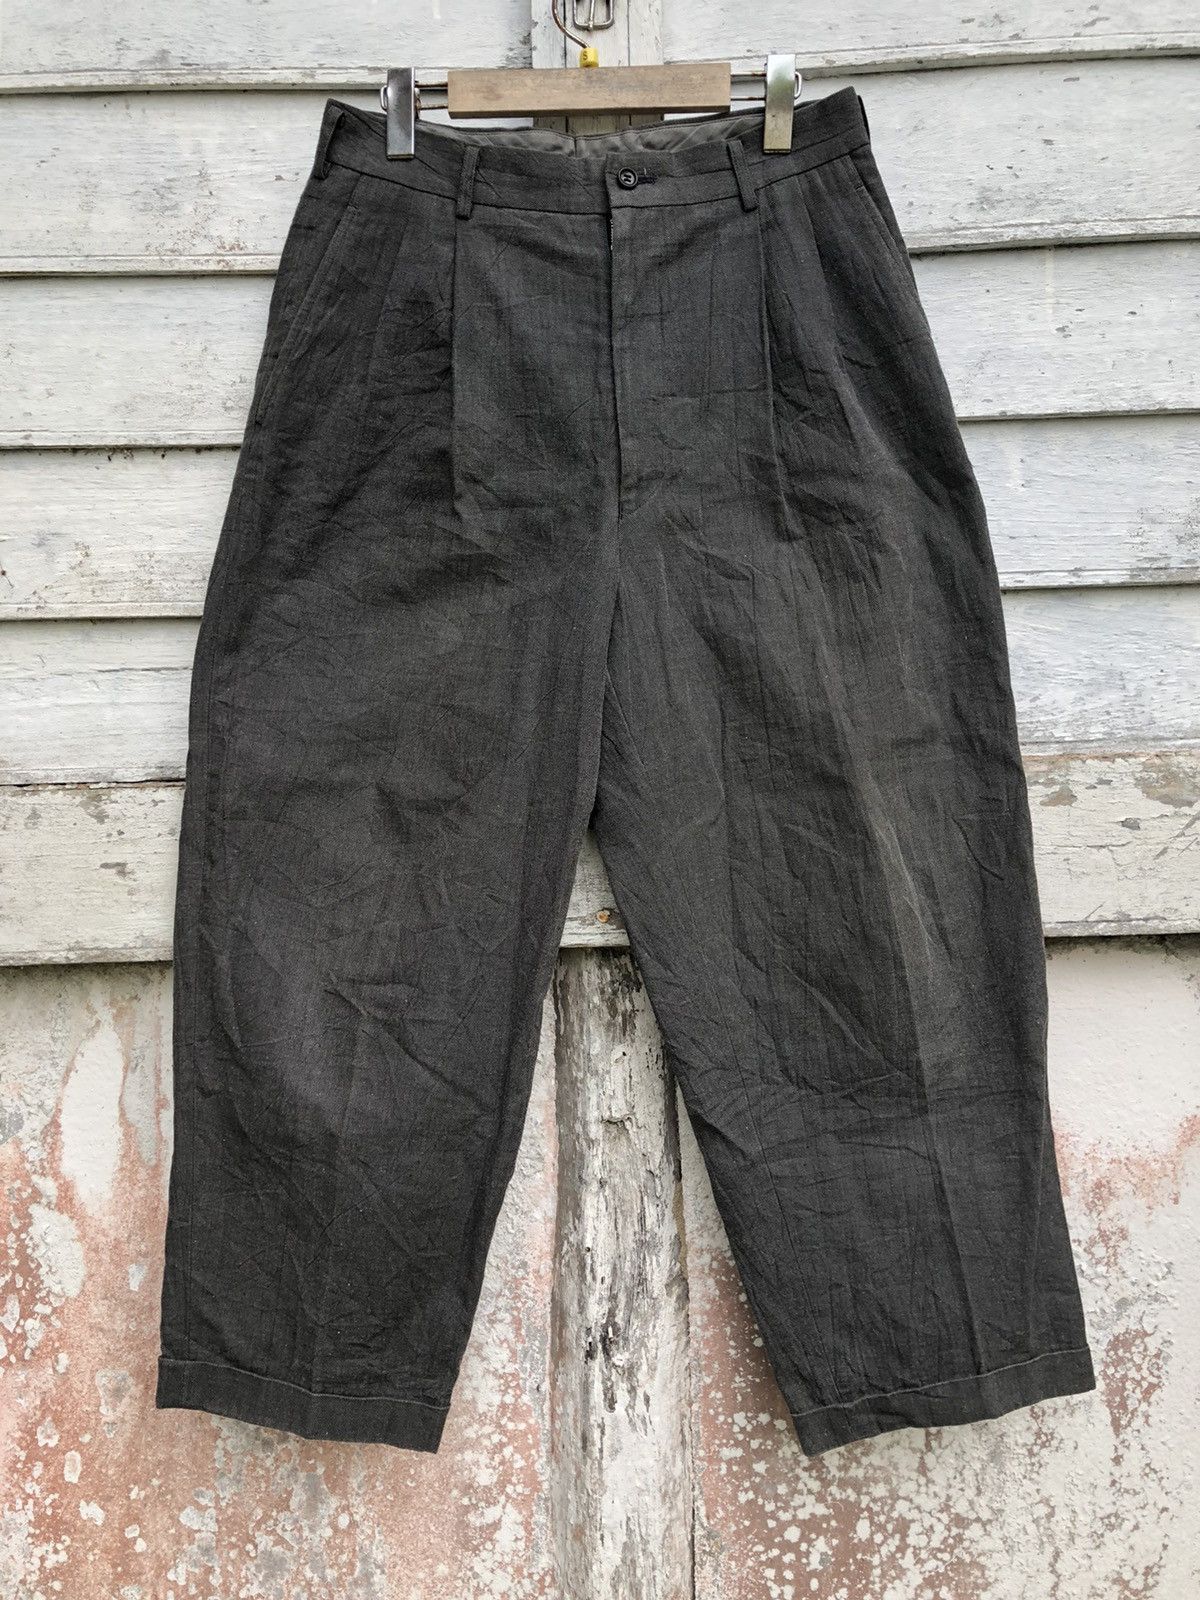 Comme Des Garcon AD 99 Chinos Baggy Cropped Pant - 1